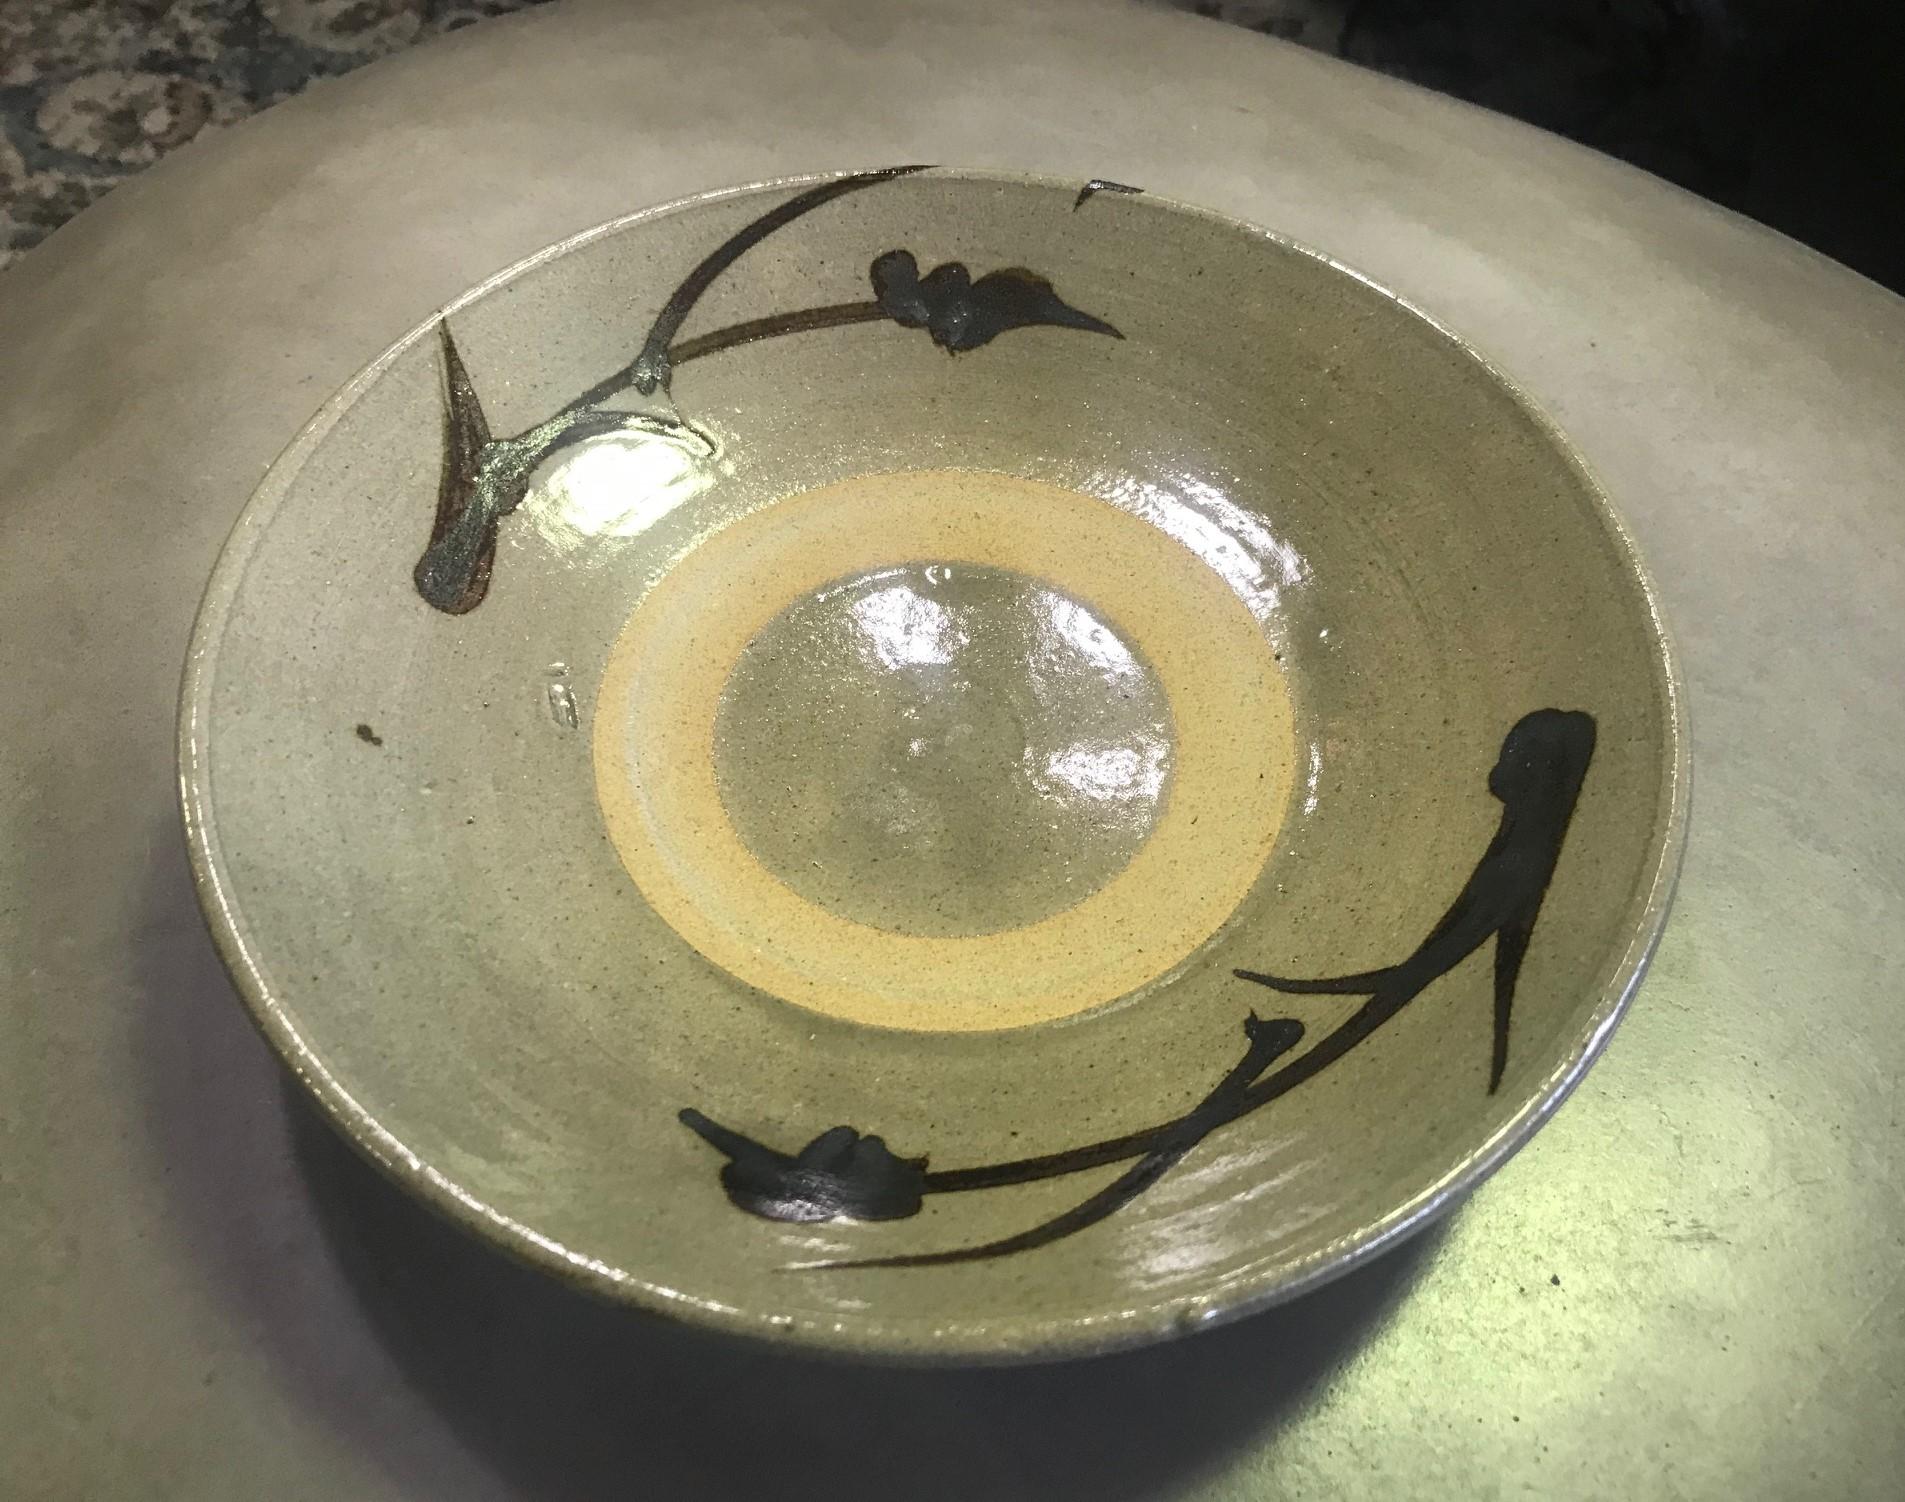 An exquisite, unique plate by master Japanese potter Shoji Hamada, a fine early example of his iron pigment brushed and glazed bamboo hakeme motif. The original Hamada stamped or sealed and signed box is included. Rare to find such a beautiful piece